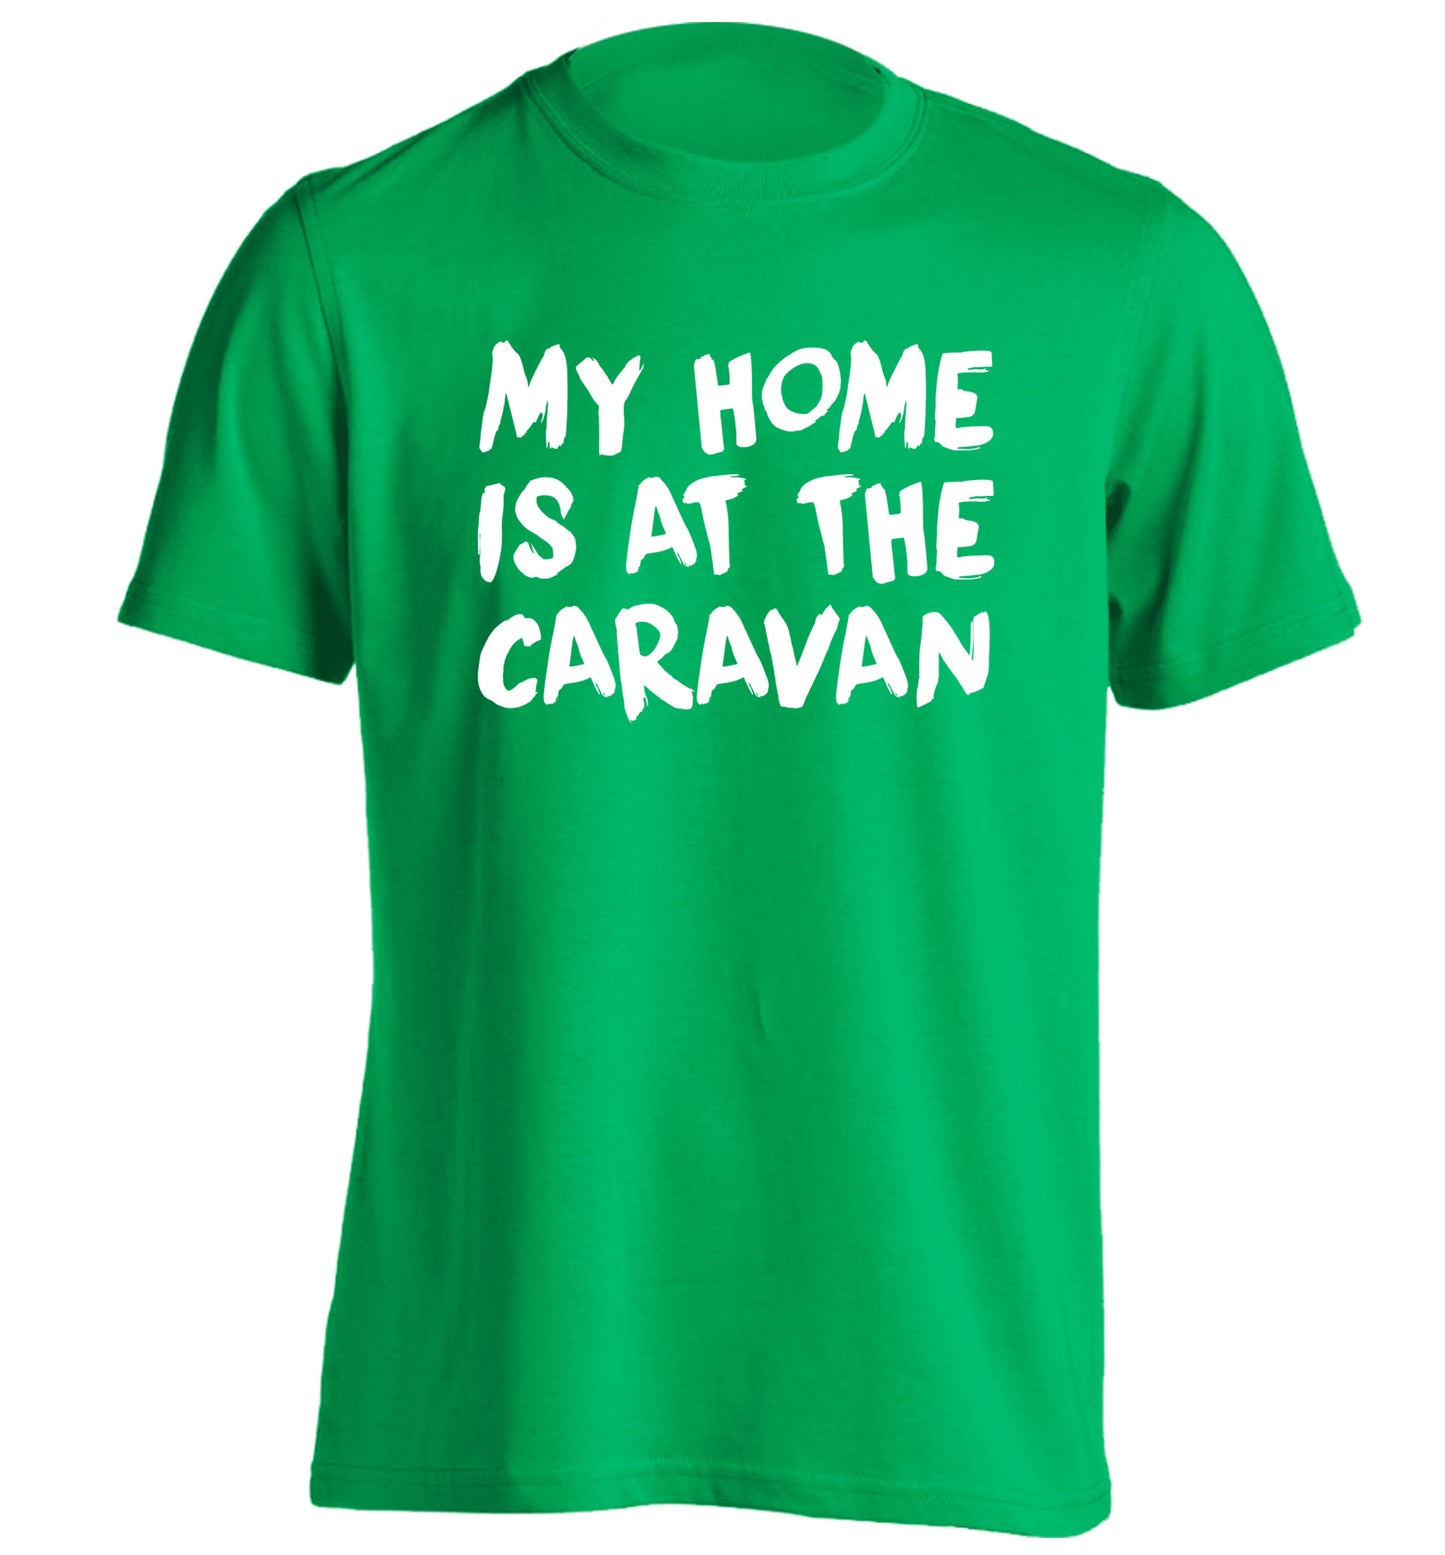 My home is at the caravan adults unisex green Tshirt 2XL